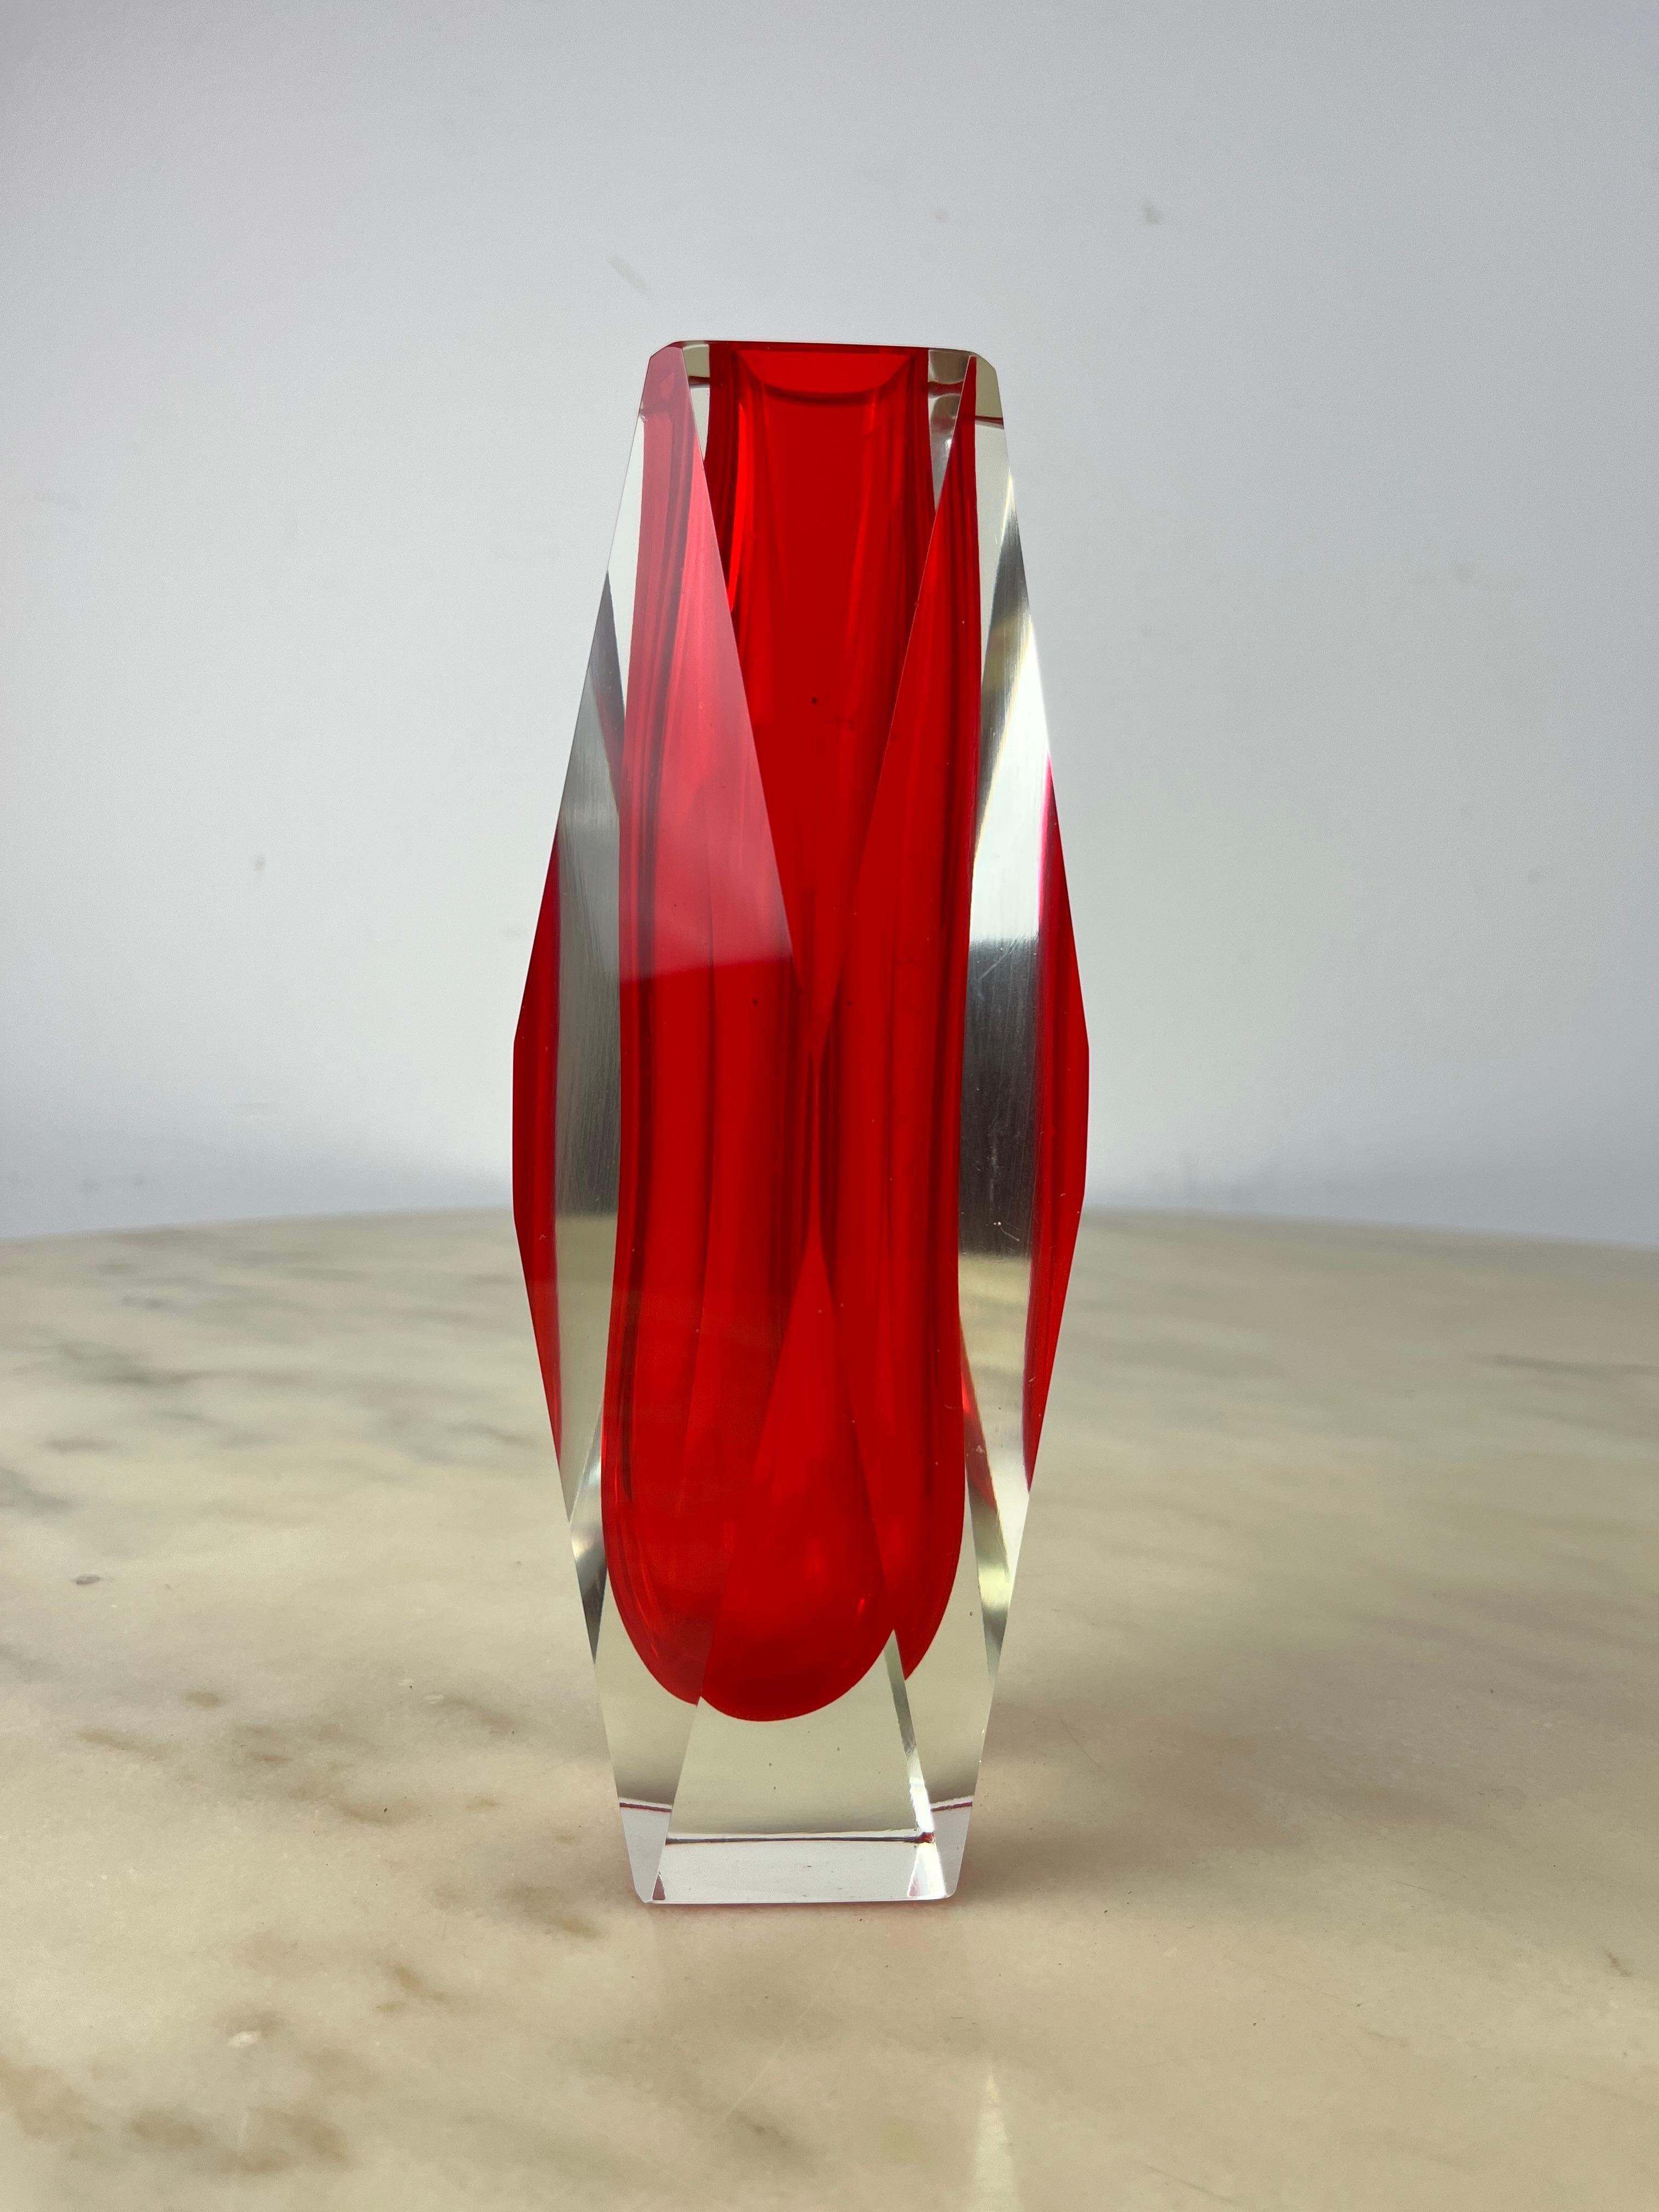 Vintage Murano Glass Vase, Italy, 1970s For Sale 4